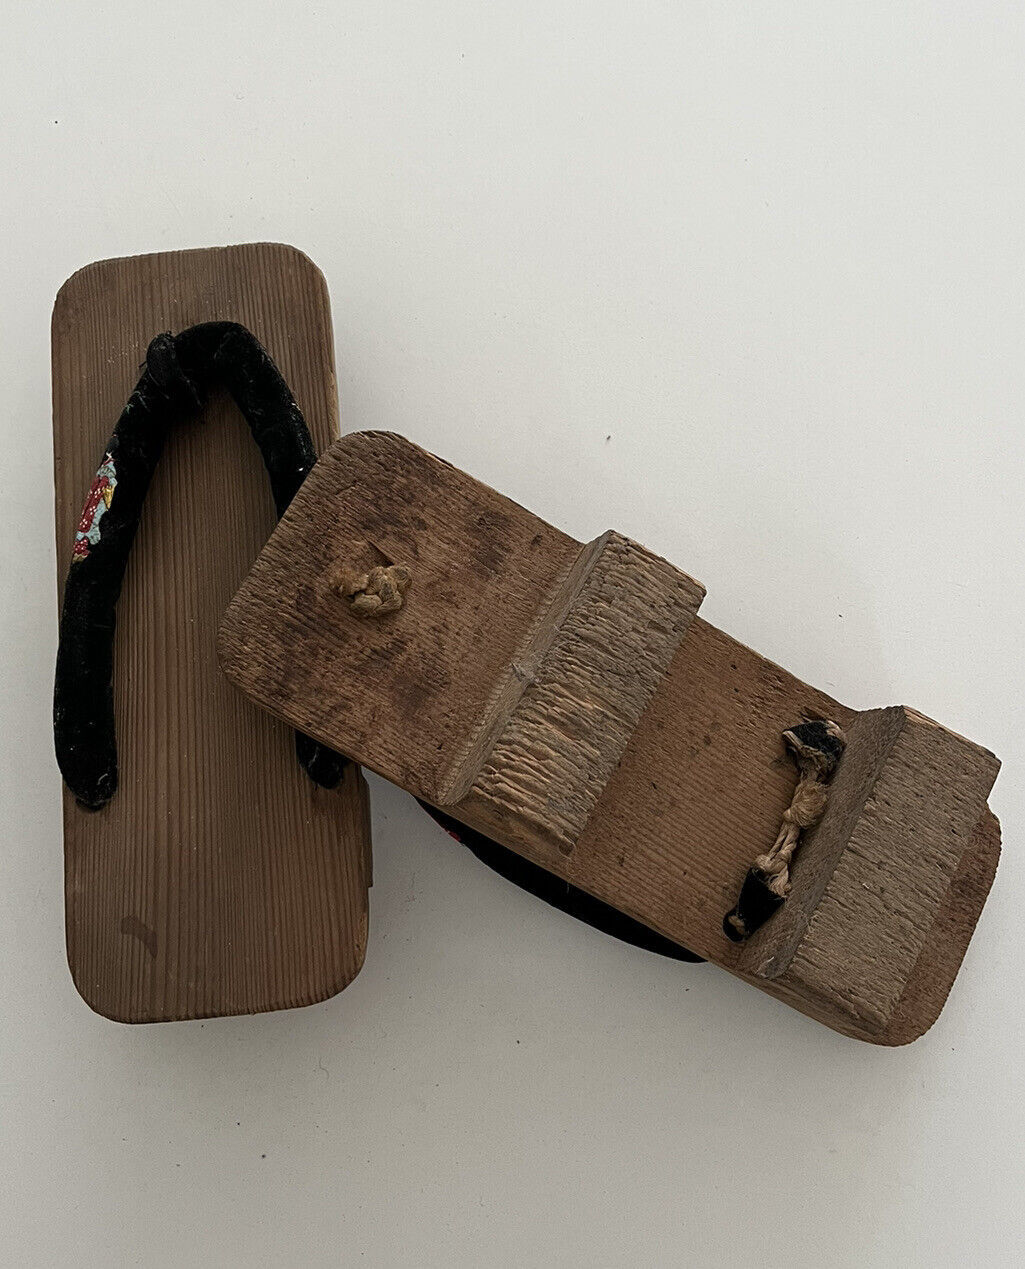 Vintage Traditional Japanese Geta Sandals Wood Shoes 10”L x4” W x 2”H